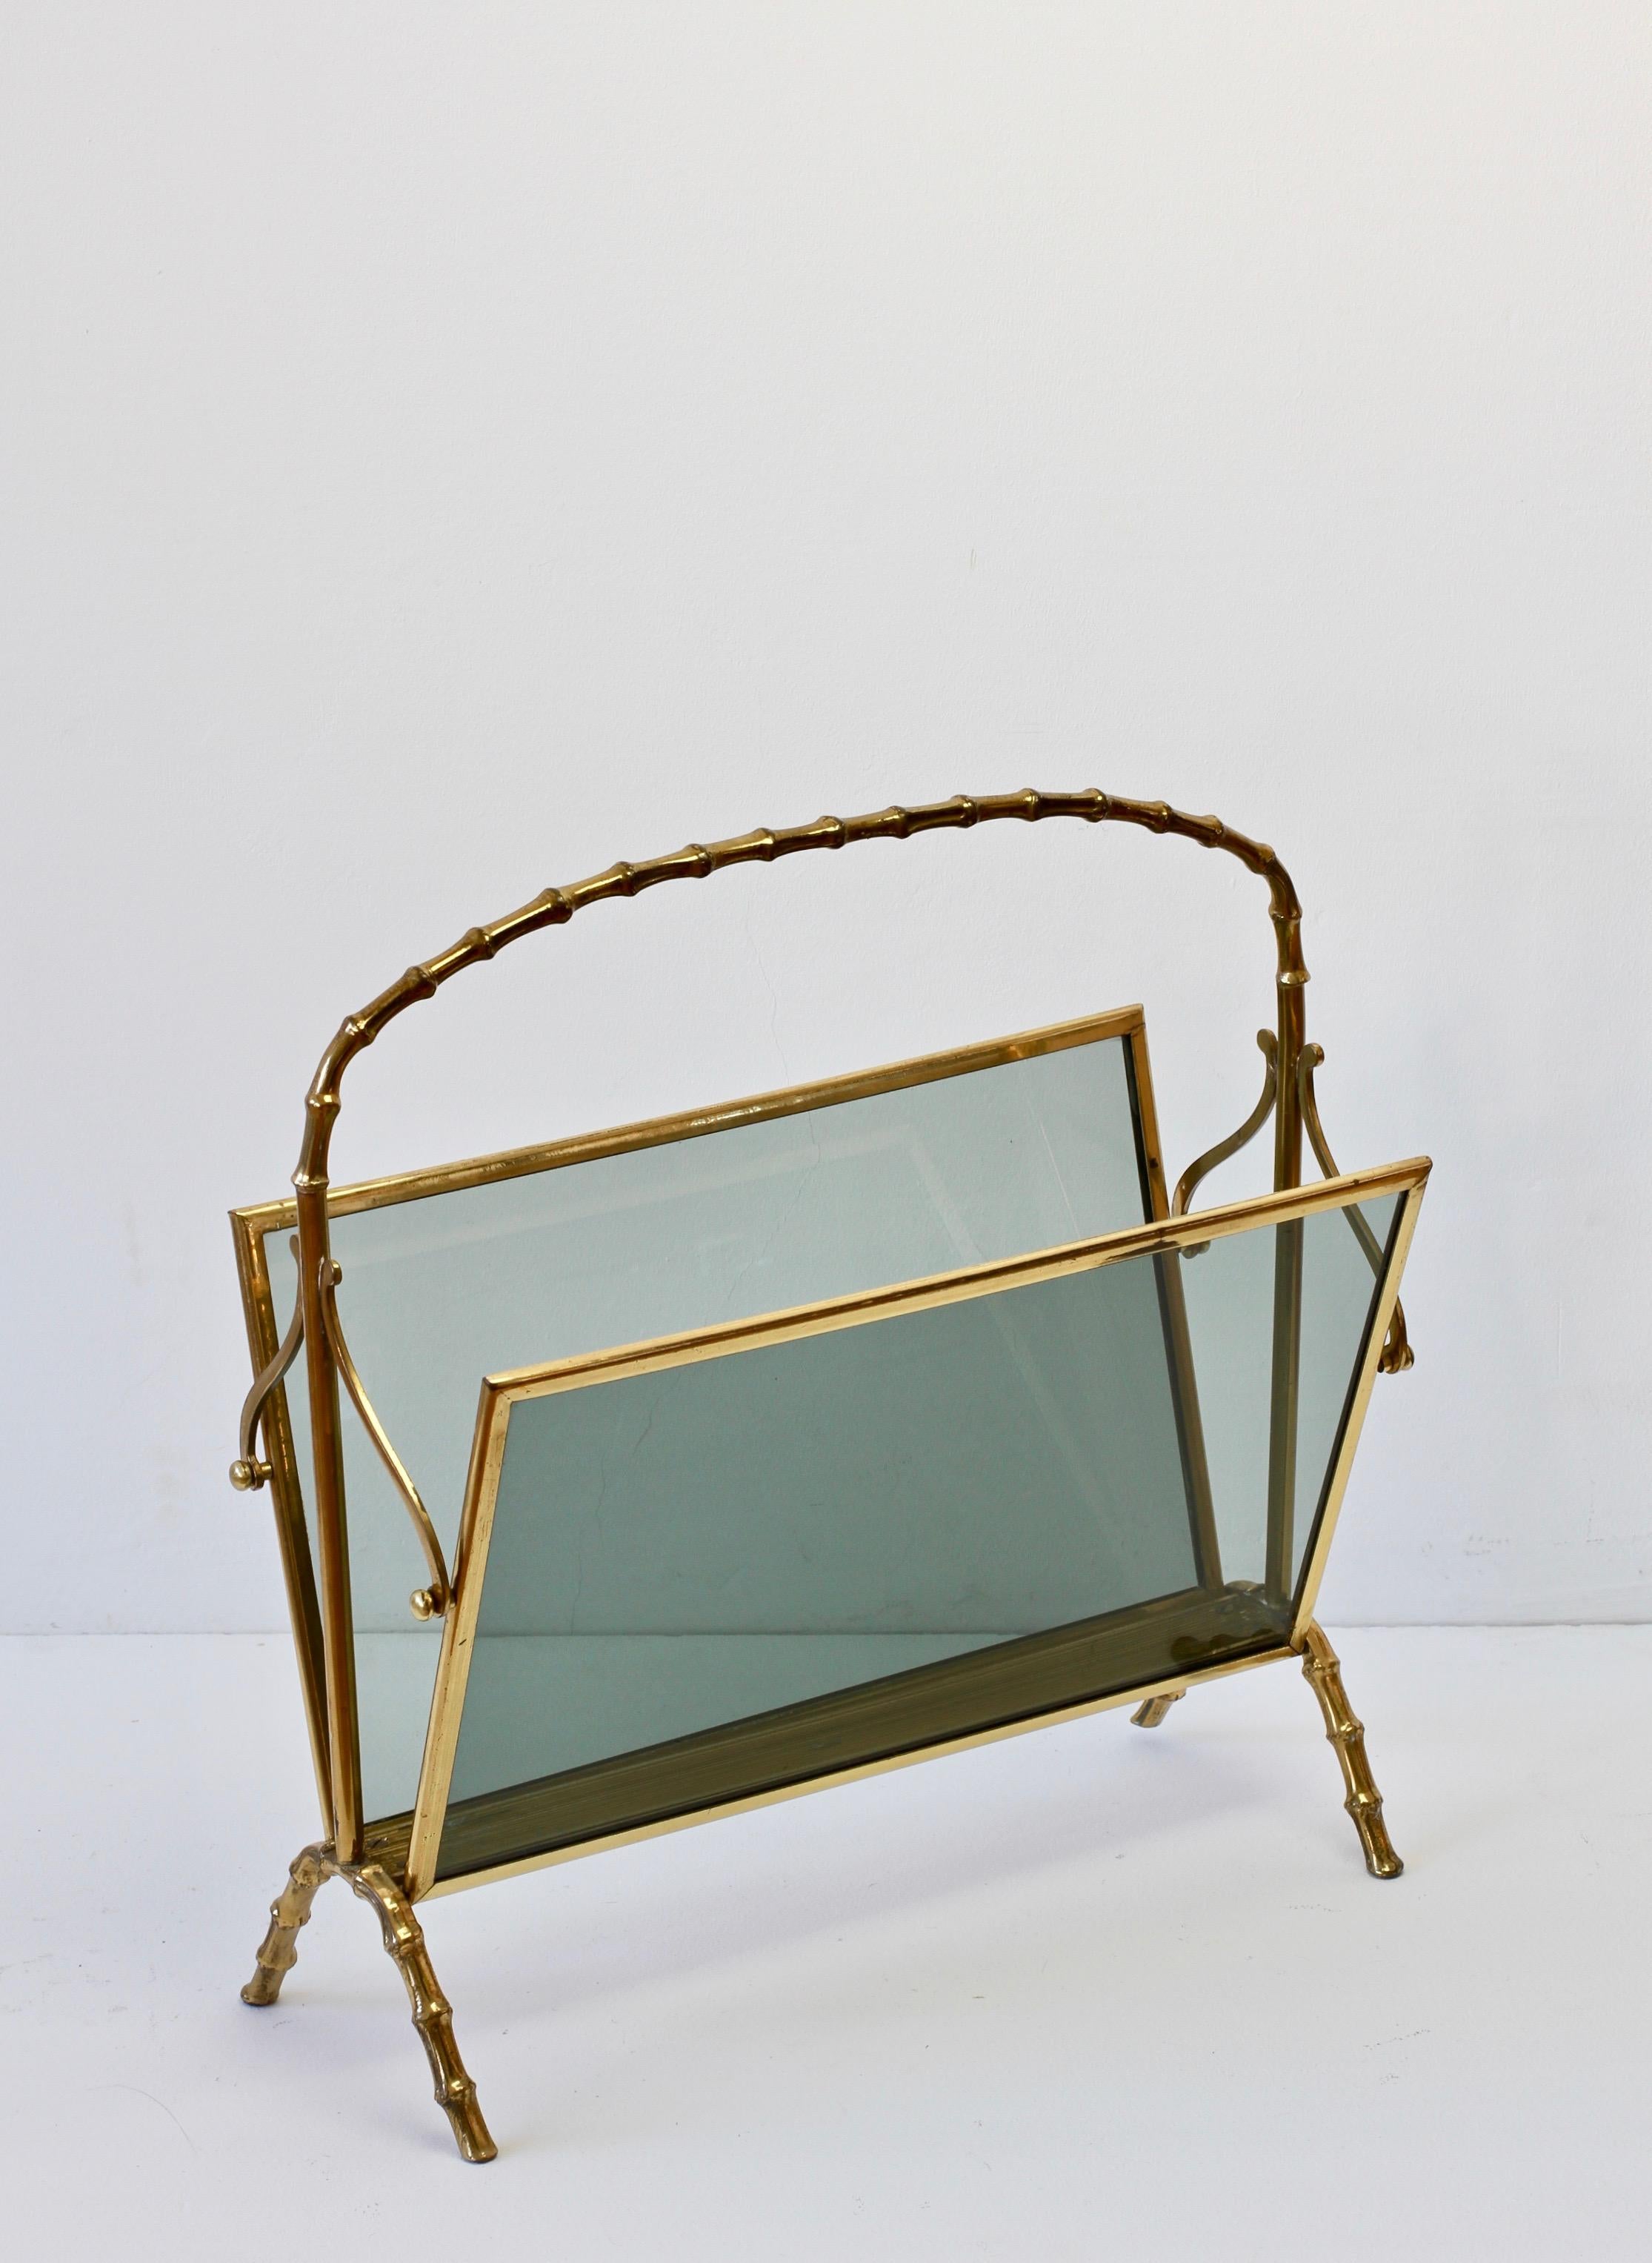 Maison Baguès attributed cast brass and smoked dark toned glass magazine / newspaper / book rack, holder or stand, perfect for the Hollywood Regency style, in faux bamboo. Made in France circa 1950s, perfect for any midcentury collector or